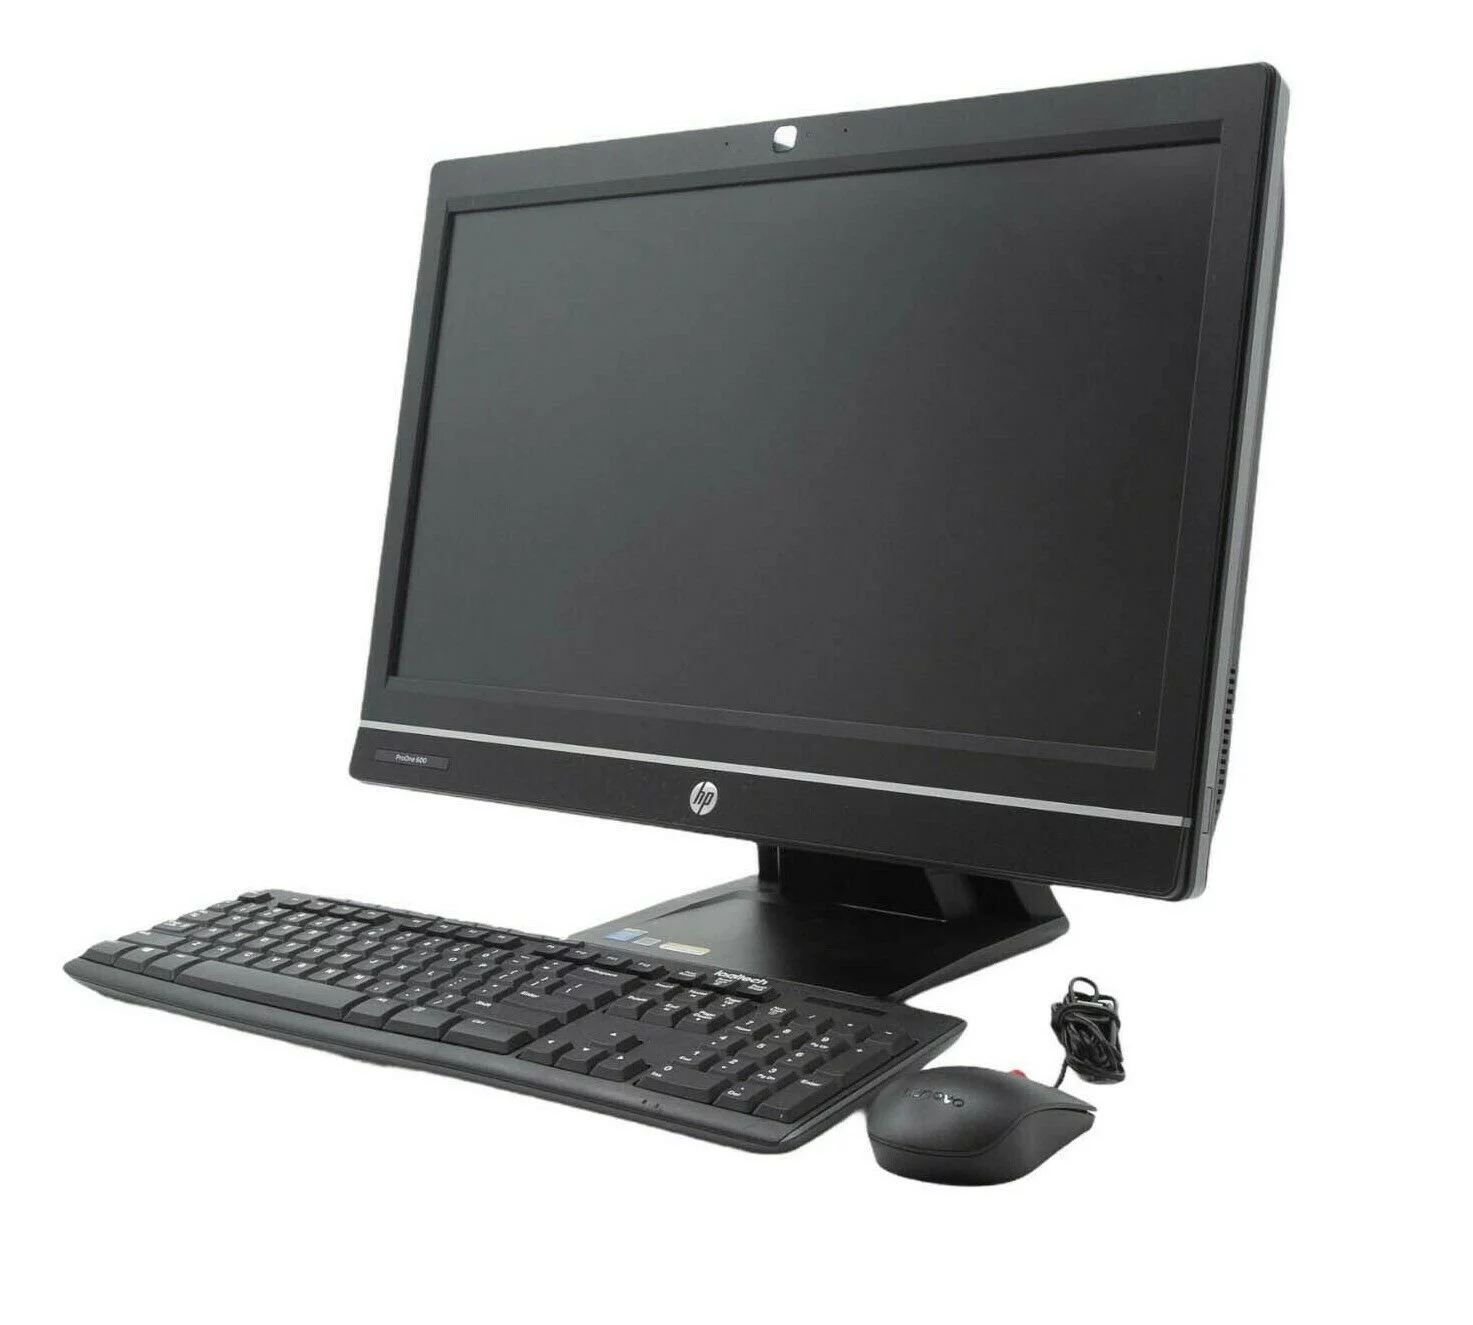 EliteOne 800 G1 21.5 Non-Touch All-in-One PC